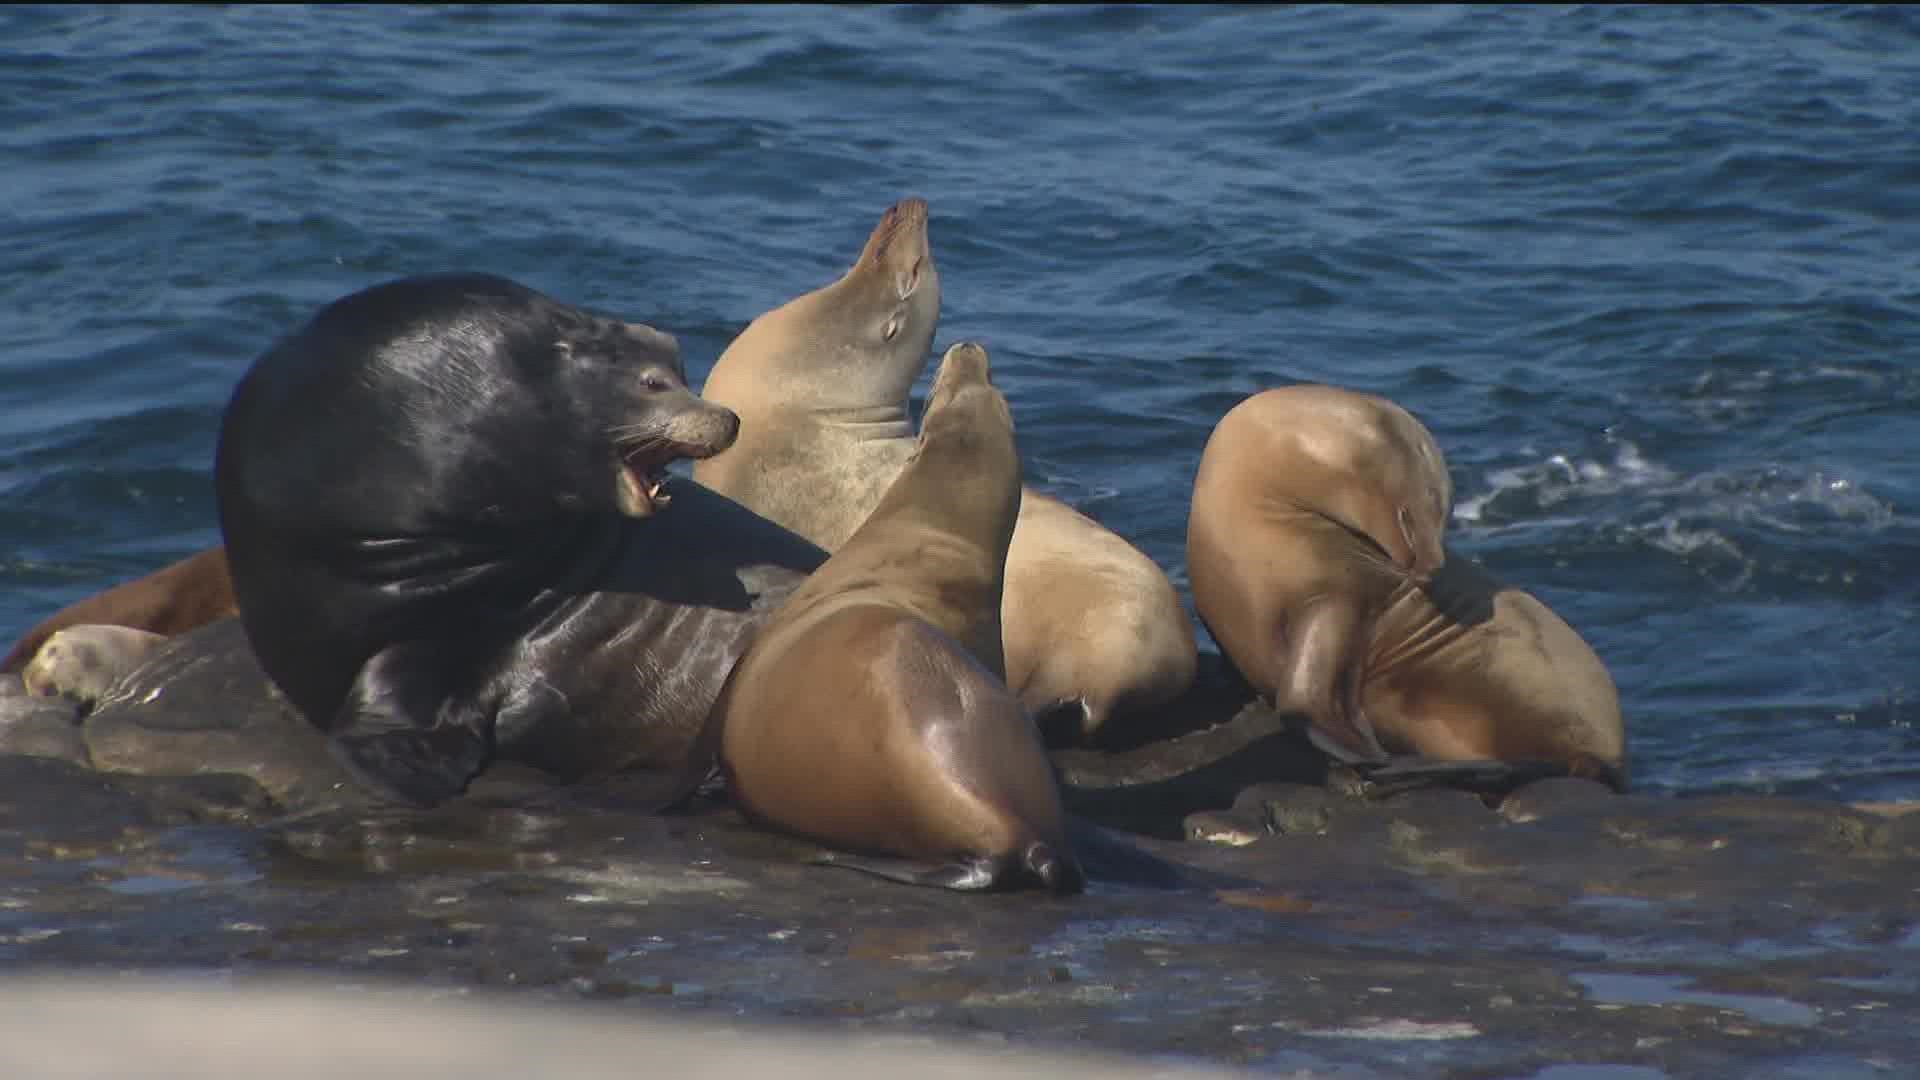 Both sides speak out in favor of the sea lions or to those who want them out